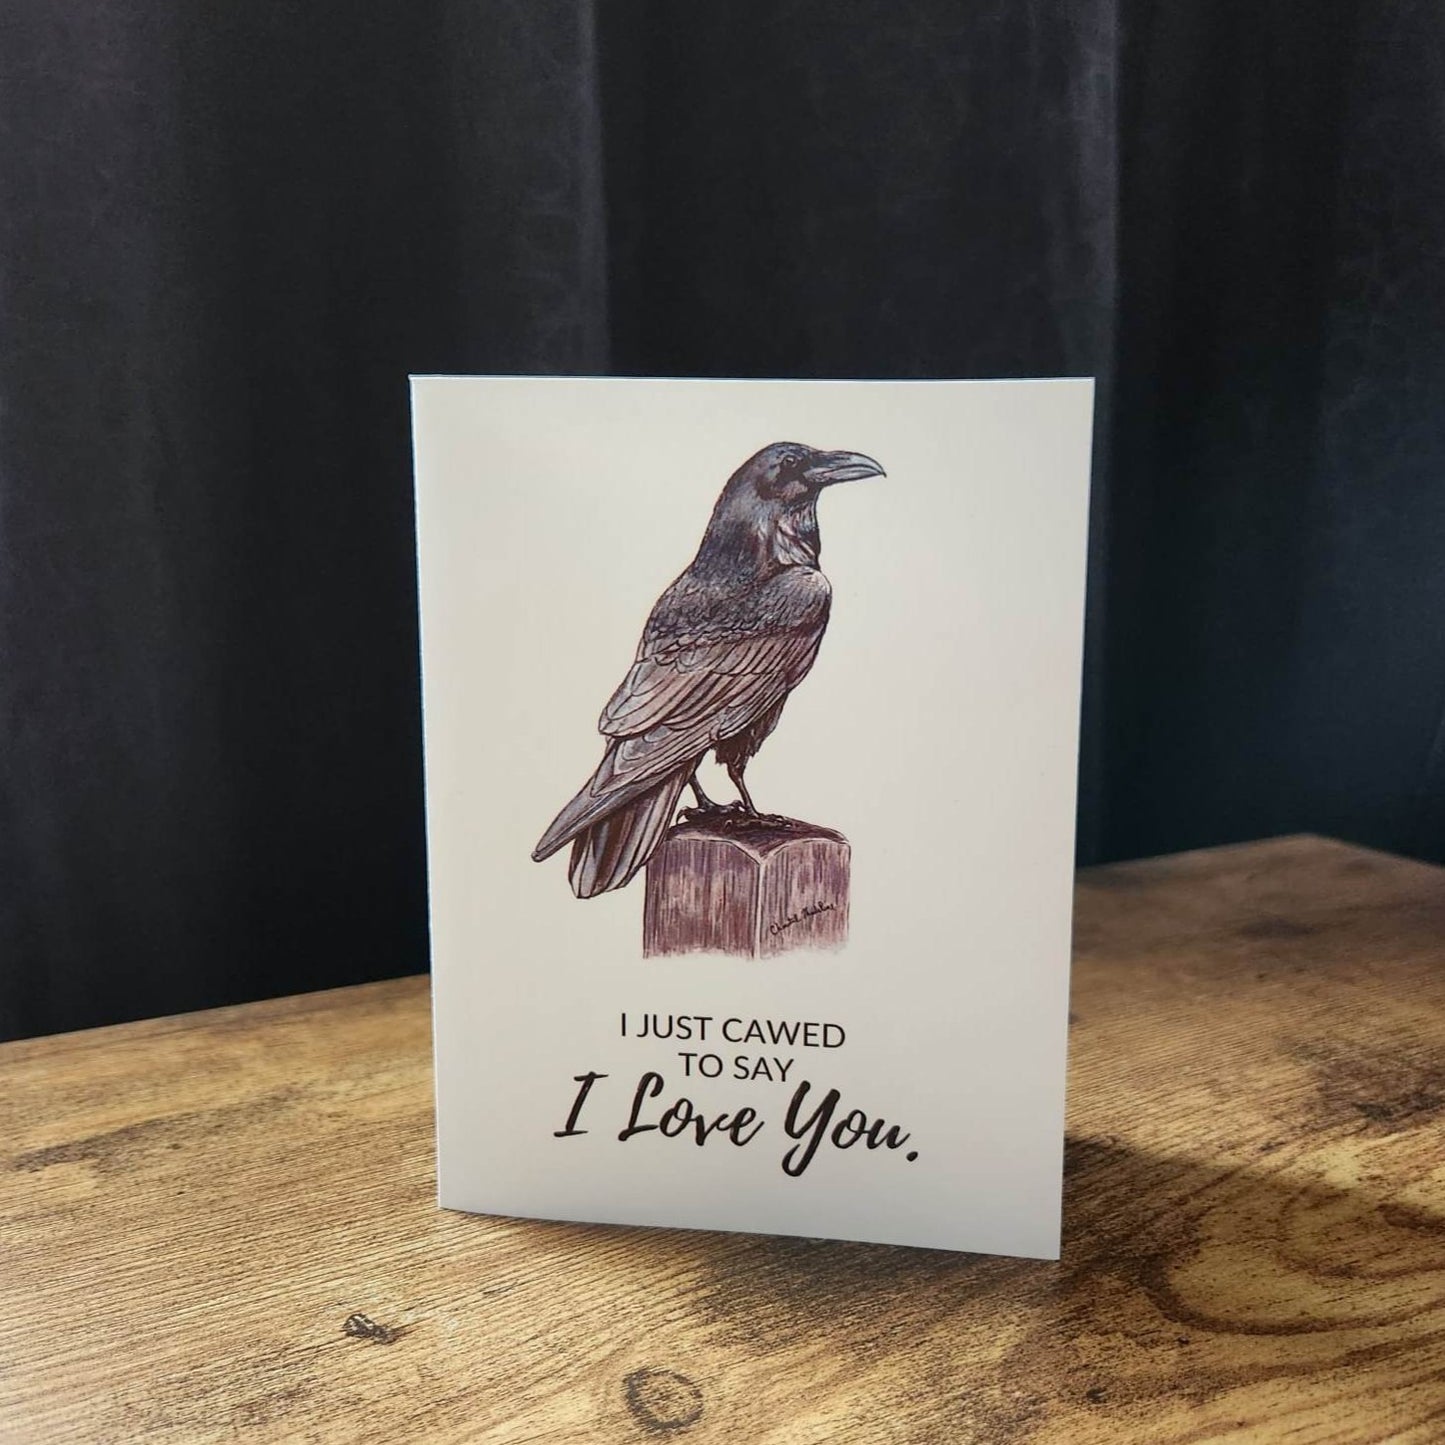 Gothic love card, Just cawed to say I love you, Raven anniversary card, Bird love card, Cute crow card, Animal valentine, Animal pun card